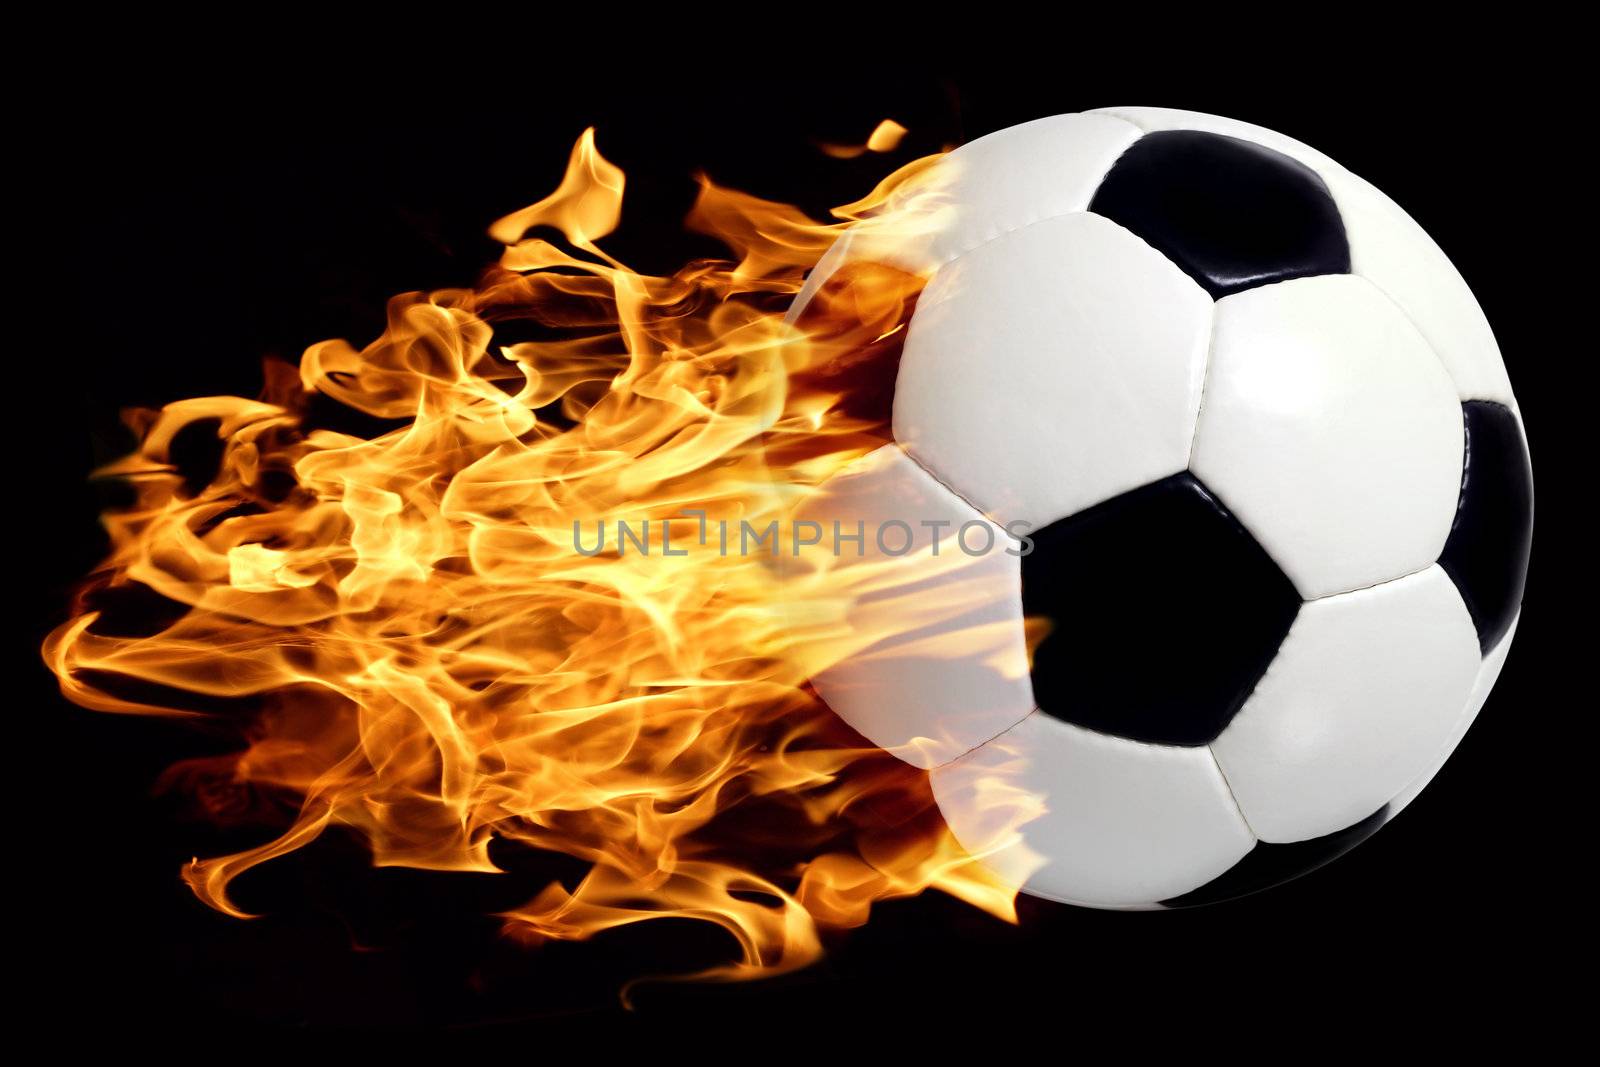 Soccer ball in flames by sumners